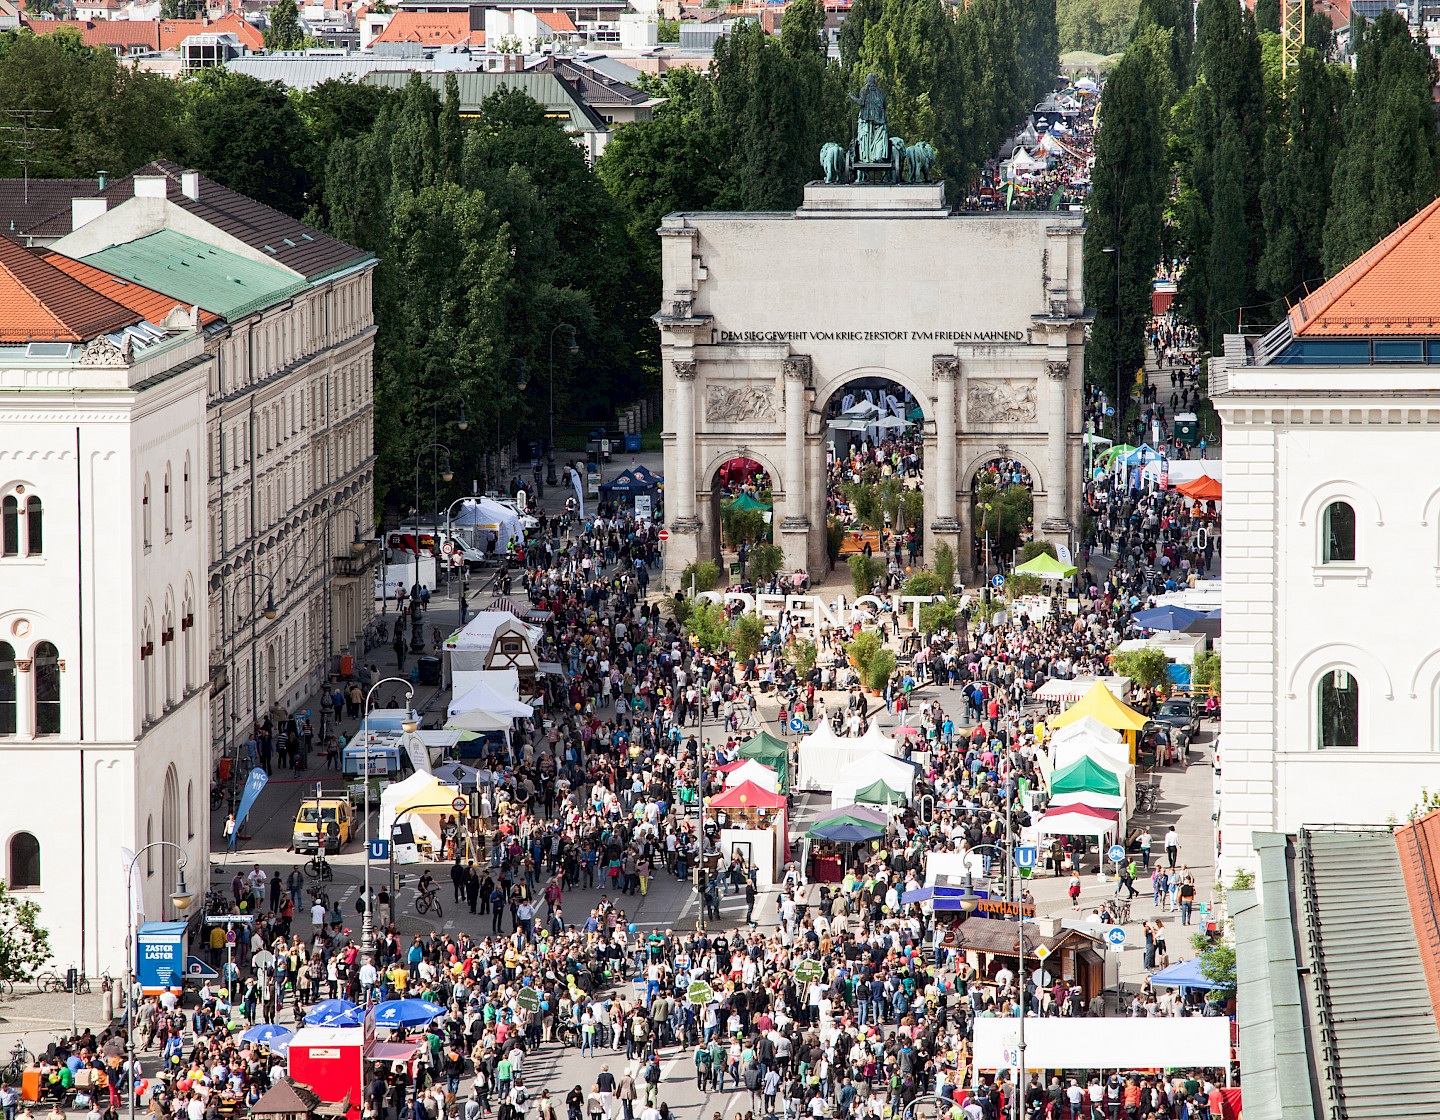 Das Zamanand Festival is a street festival at Ludwigstraße with hundreds of thousand spectators.